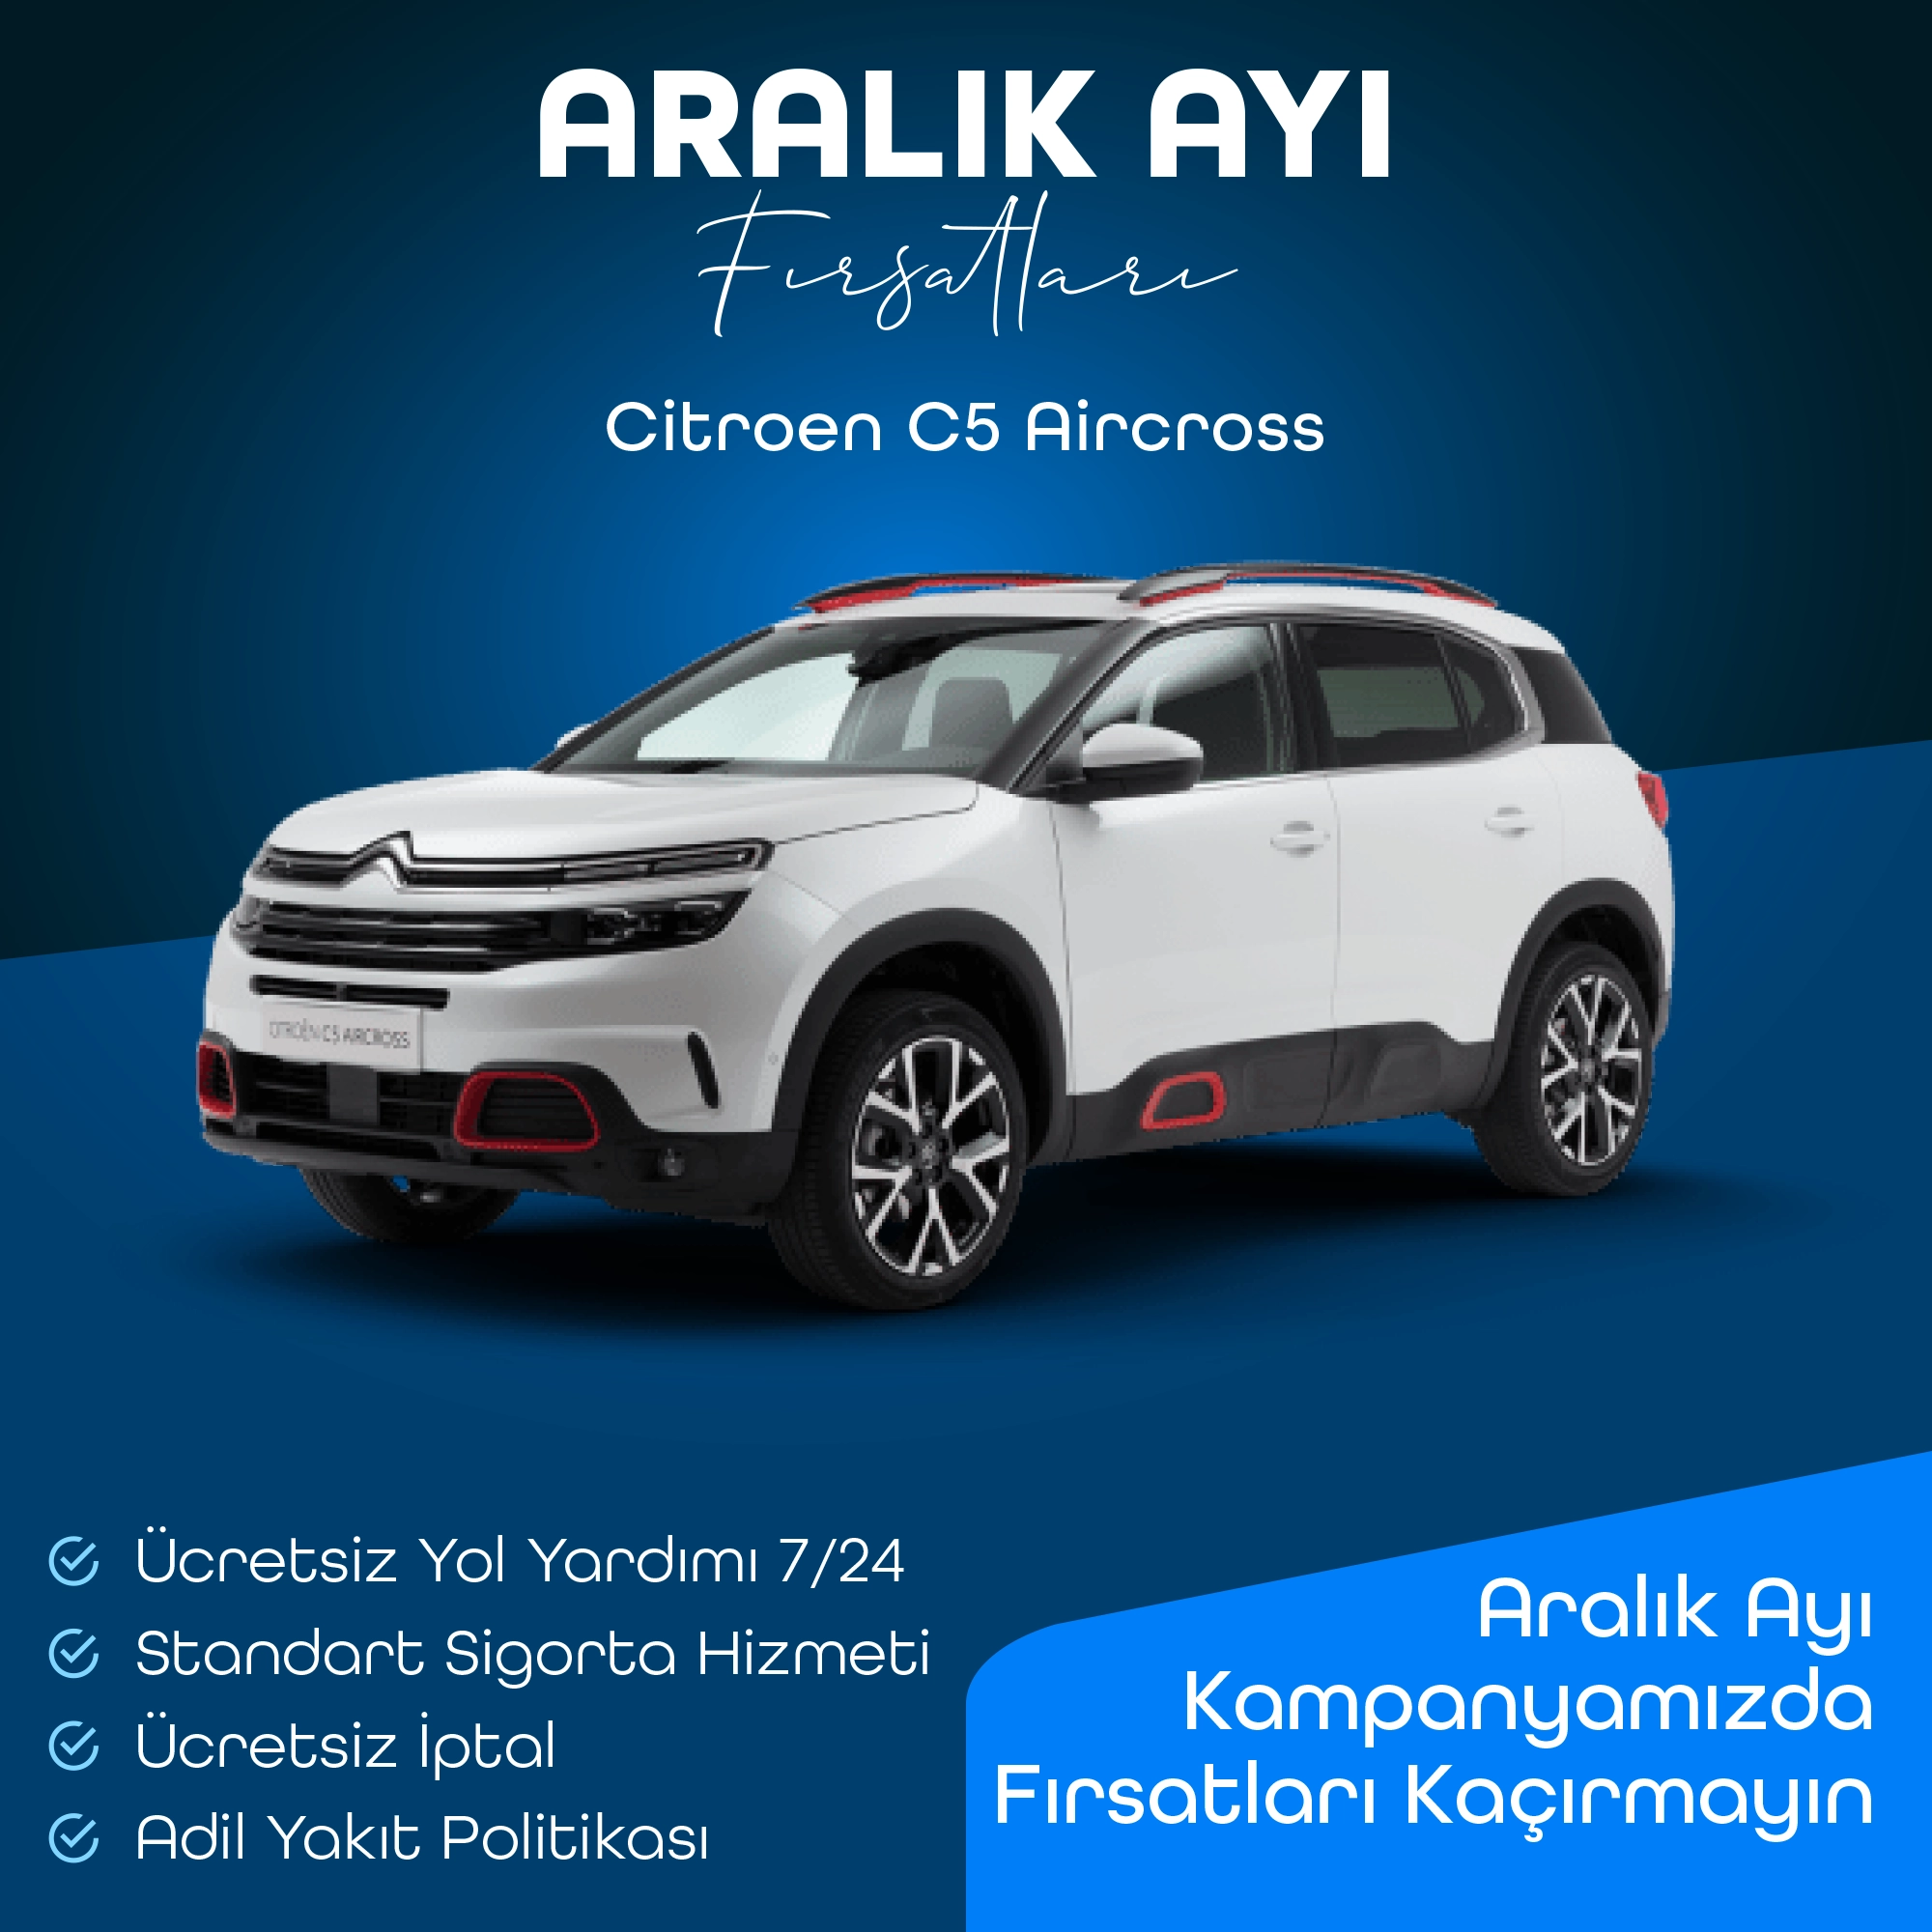 This Car Is Very Pleasant, The Choice Of Those Who Want To Have A Joyful And Good Time With Your Family Citroen C5 Aircross